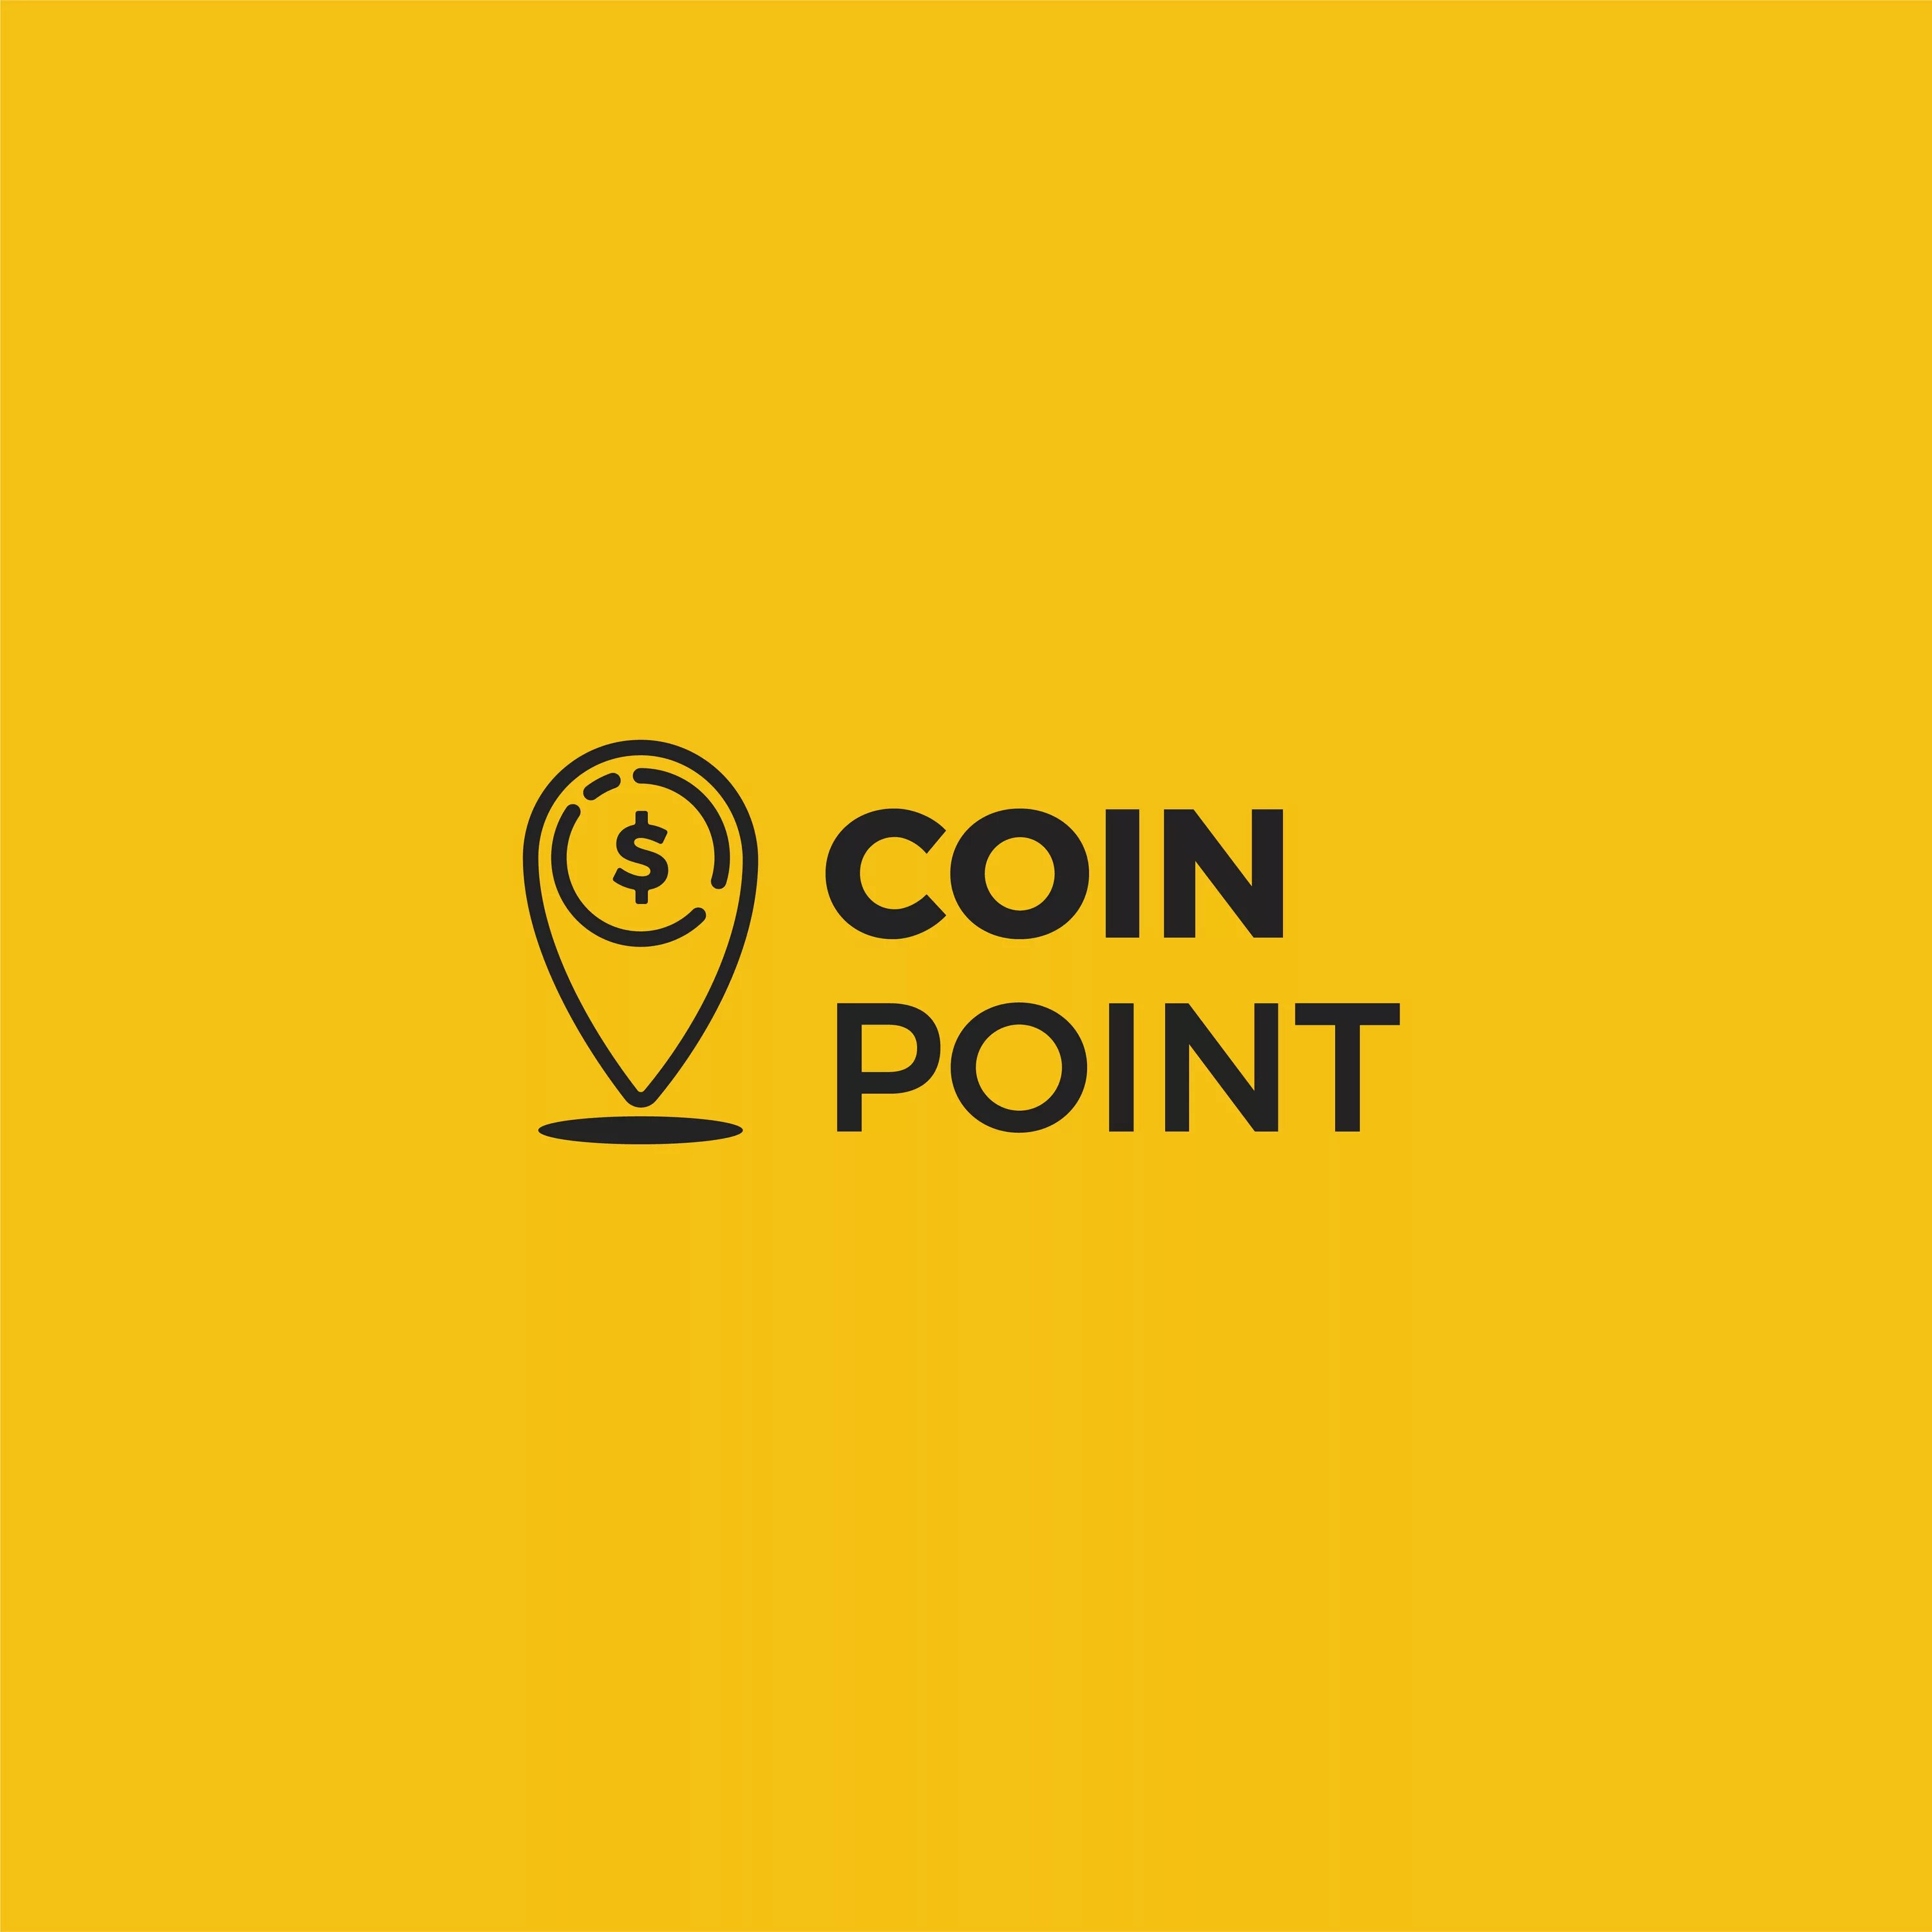 Coin point